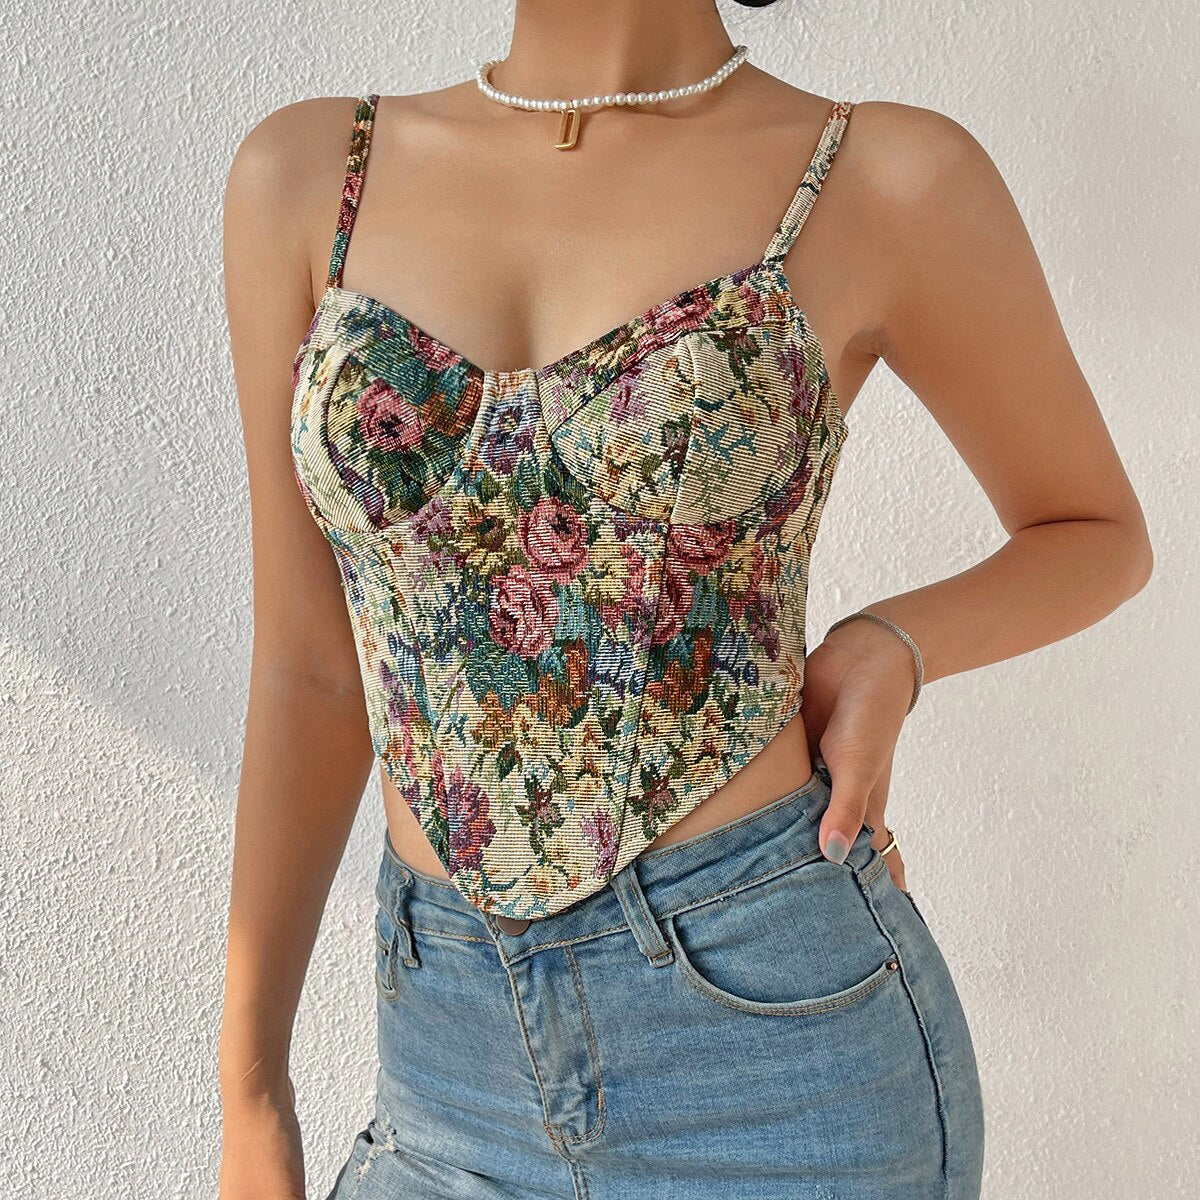 Y2k Women Elegant Designer French Vintage Print Halter Tops Chic Bandage Floral Corset Shirts Sexy Style Party Club Ladies Top voguable